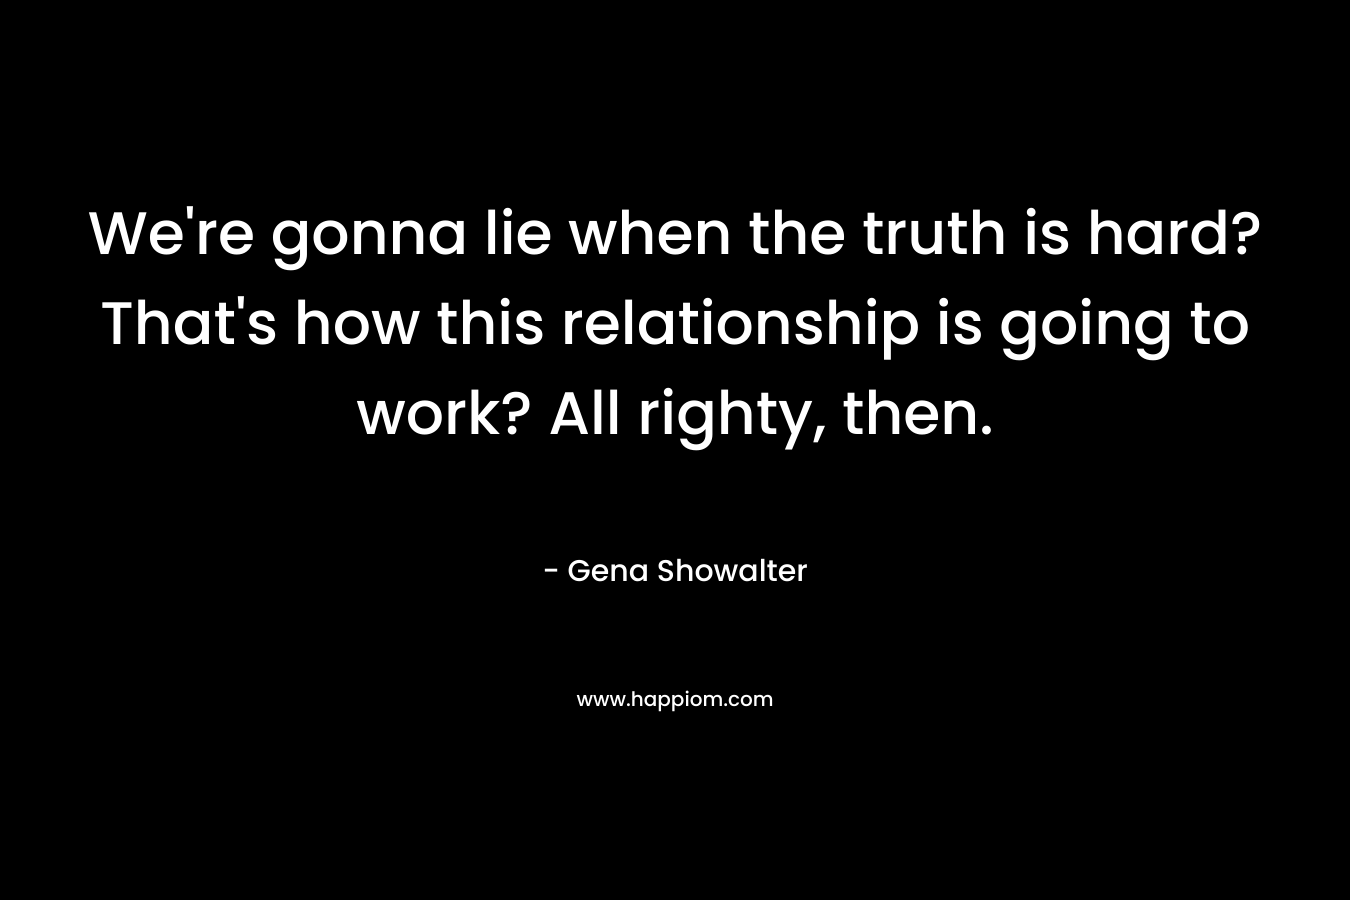 We're gonna lie when the truth is hard? That's how this relationship is going to work? All righty, then.